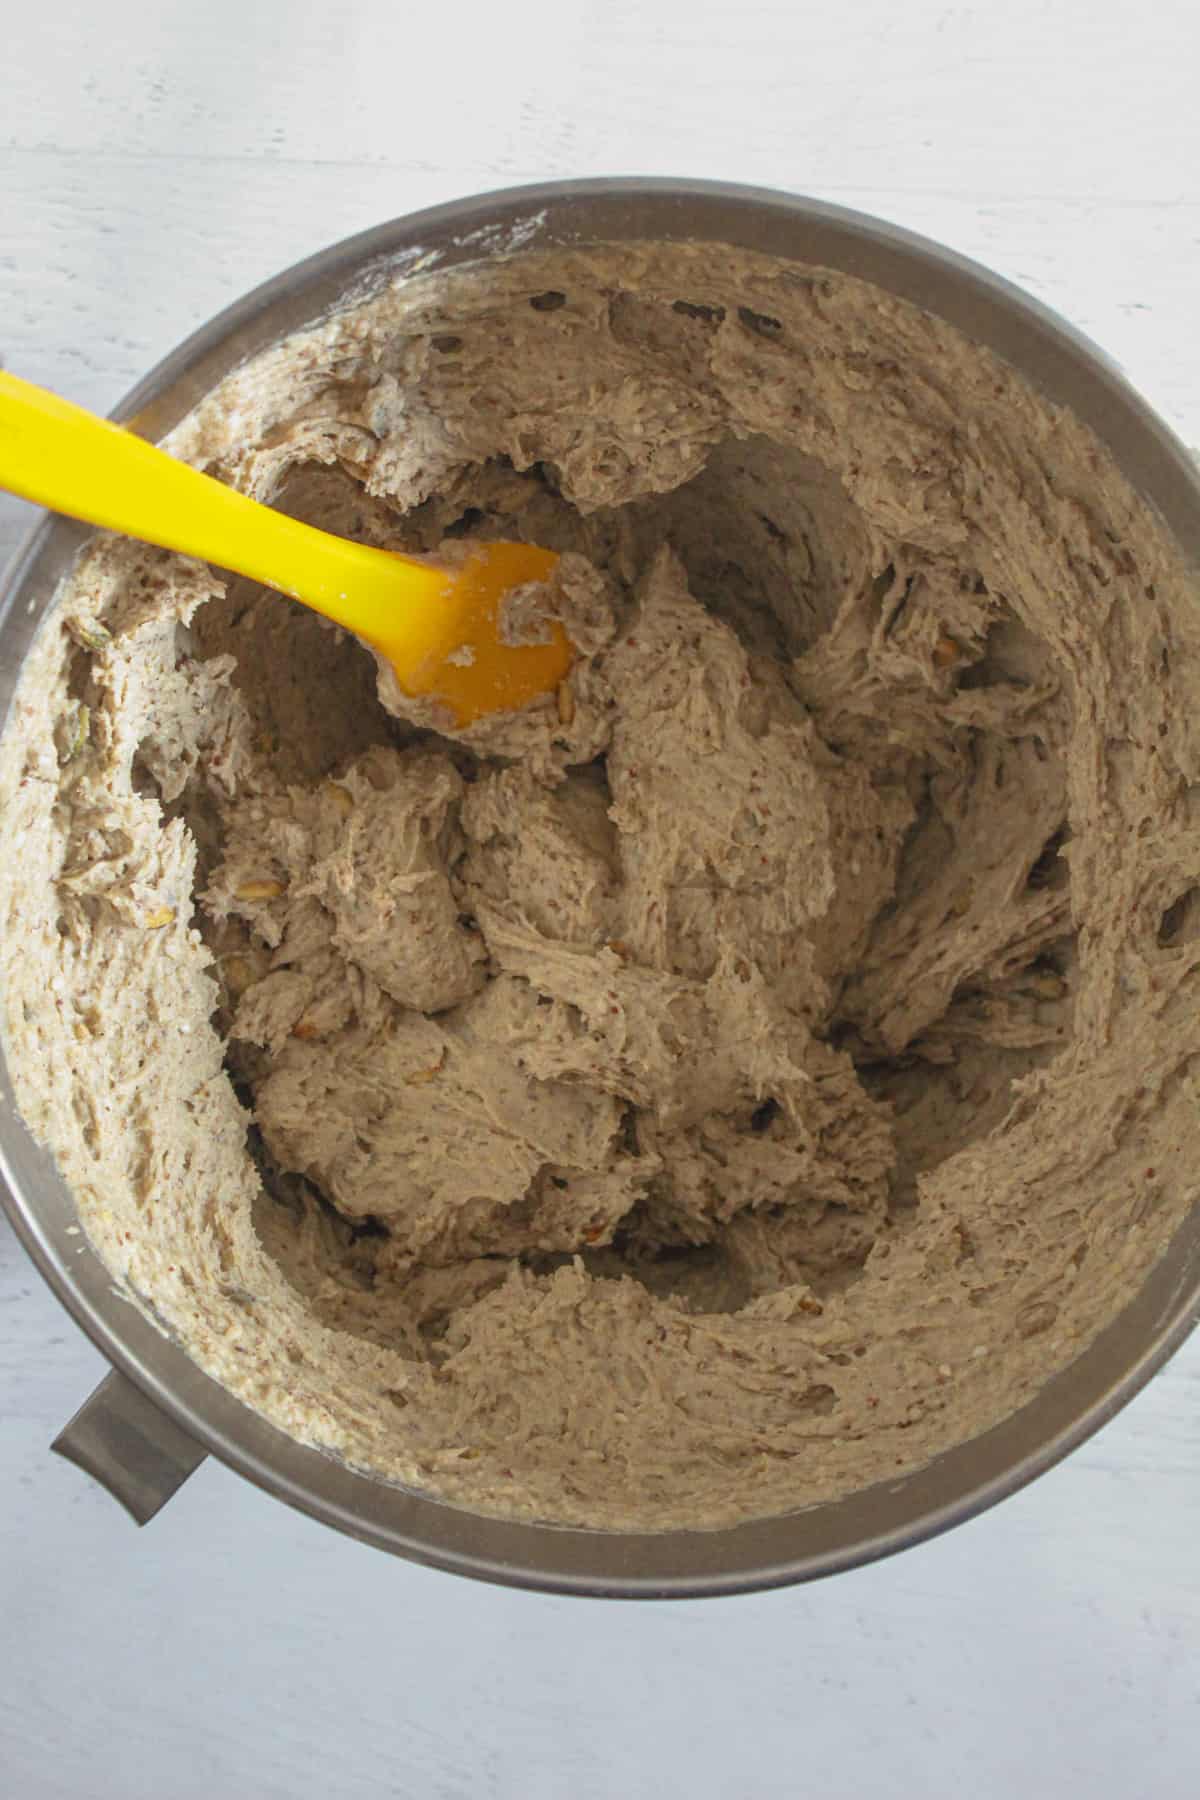 mixed batter in a mixing bowl.